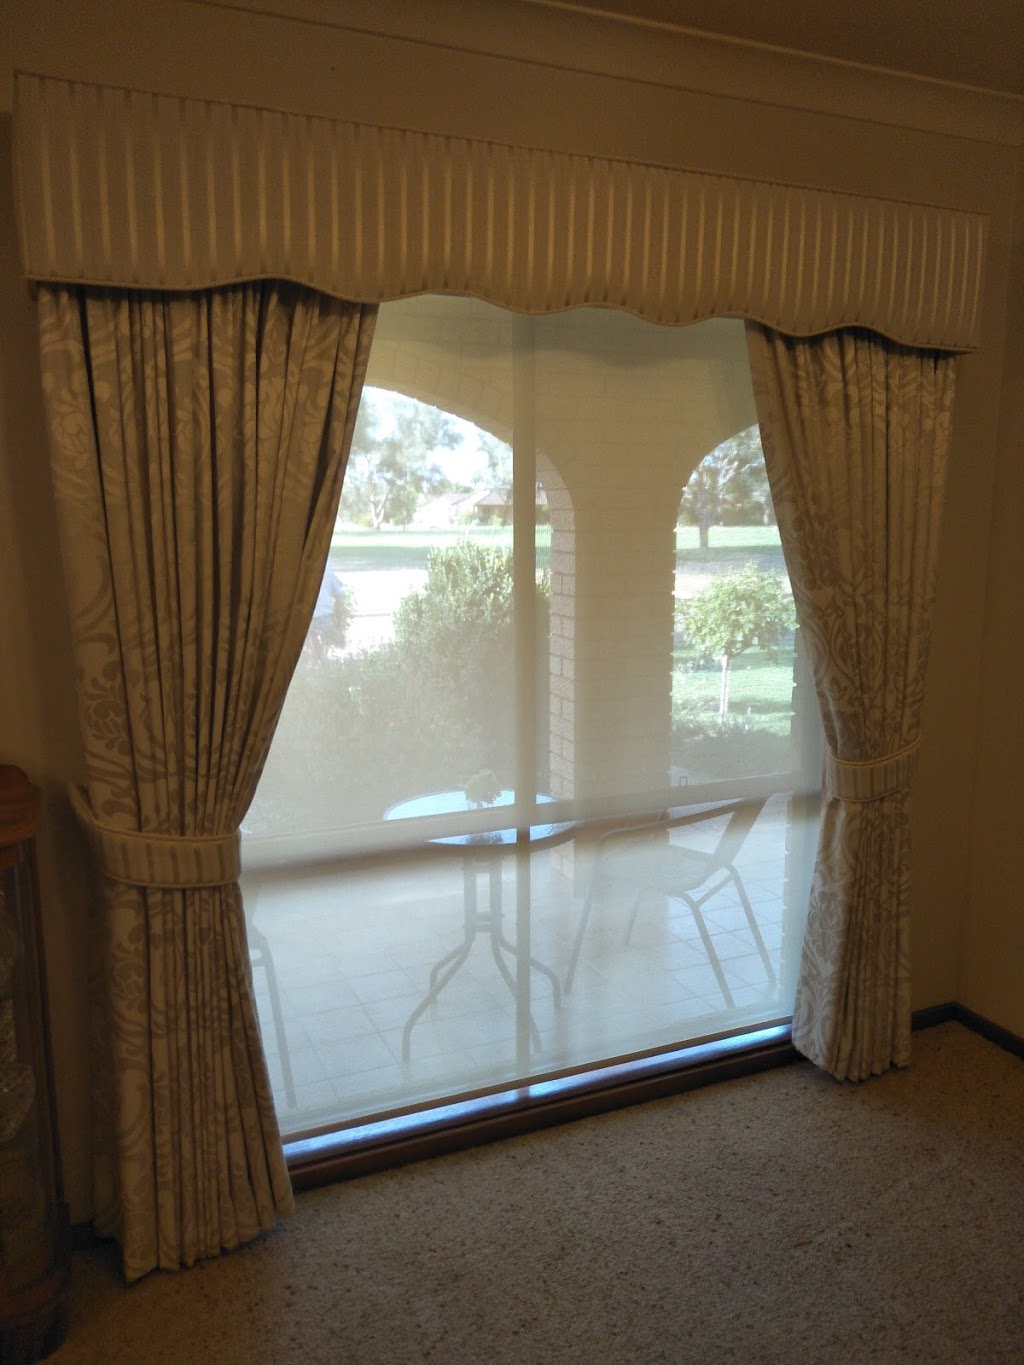 Moore Than That in Burwood - Blinds, Curtains, Romans, Awnings i | Unit 5/10 Webb St, Burwood VIC 3125, Australia | Phone: 0451 380 755